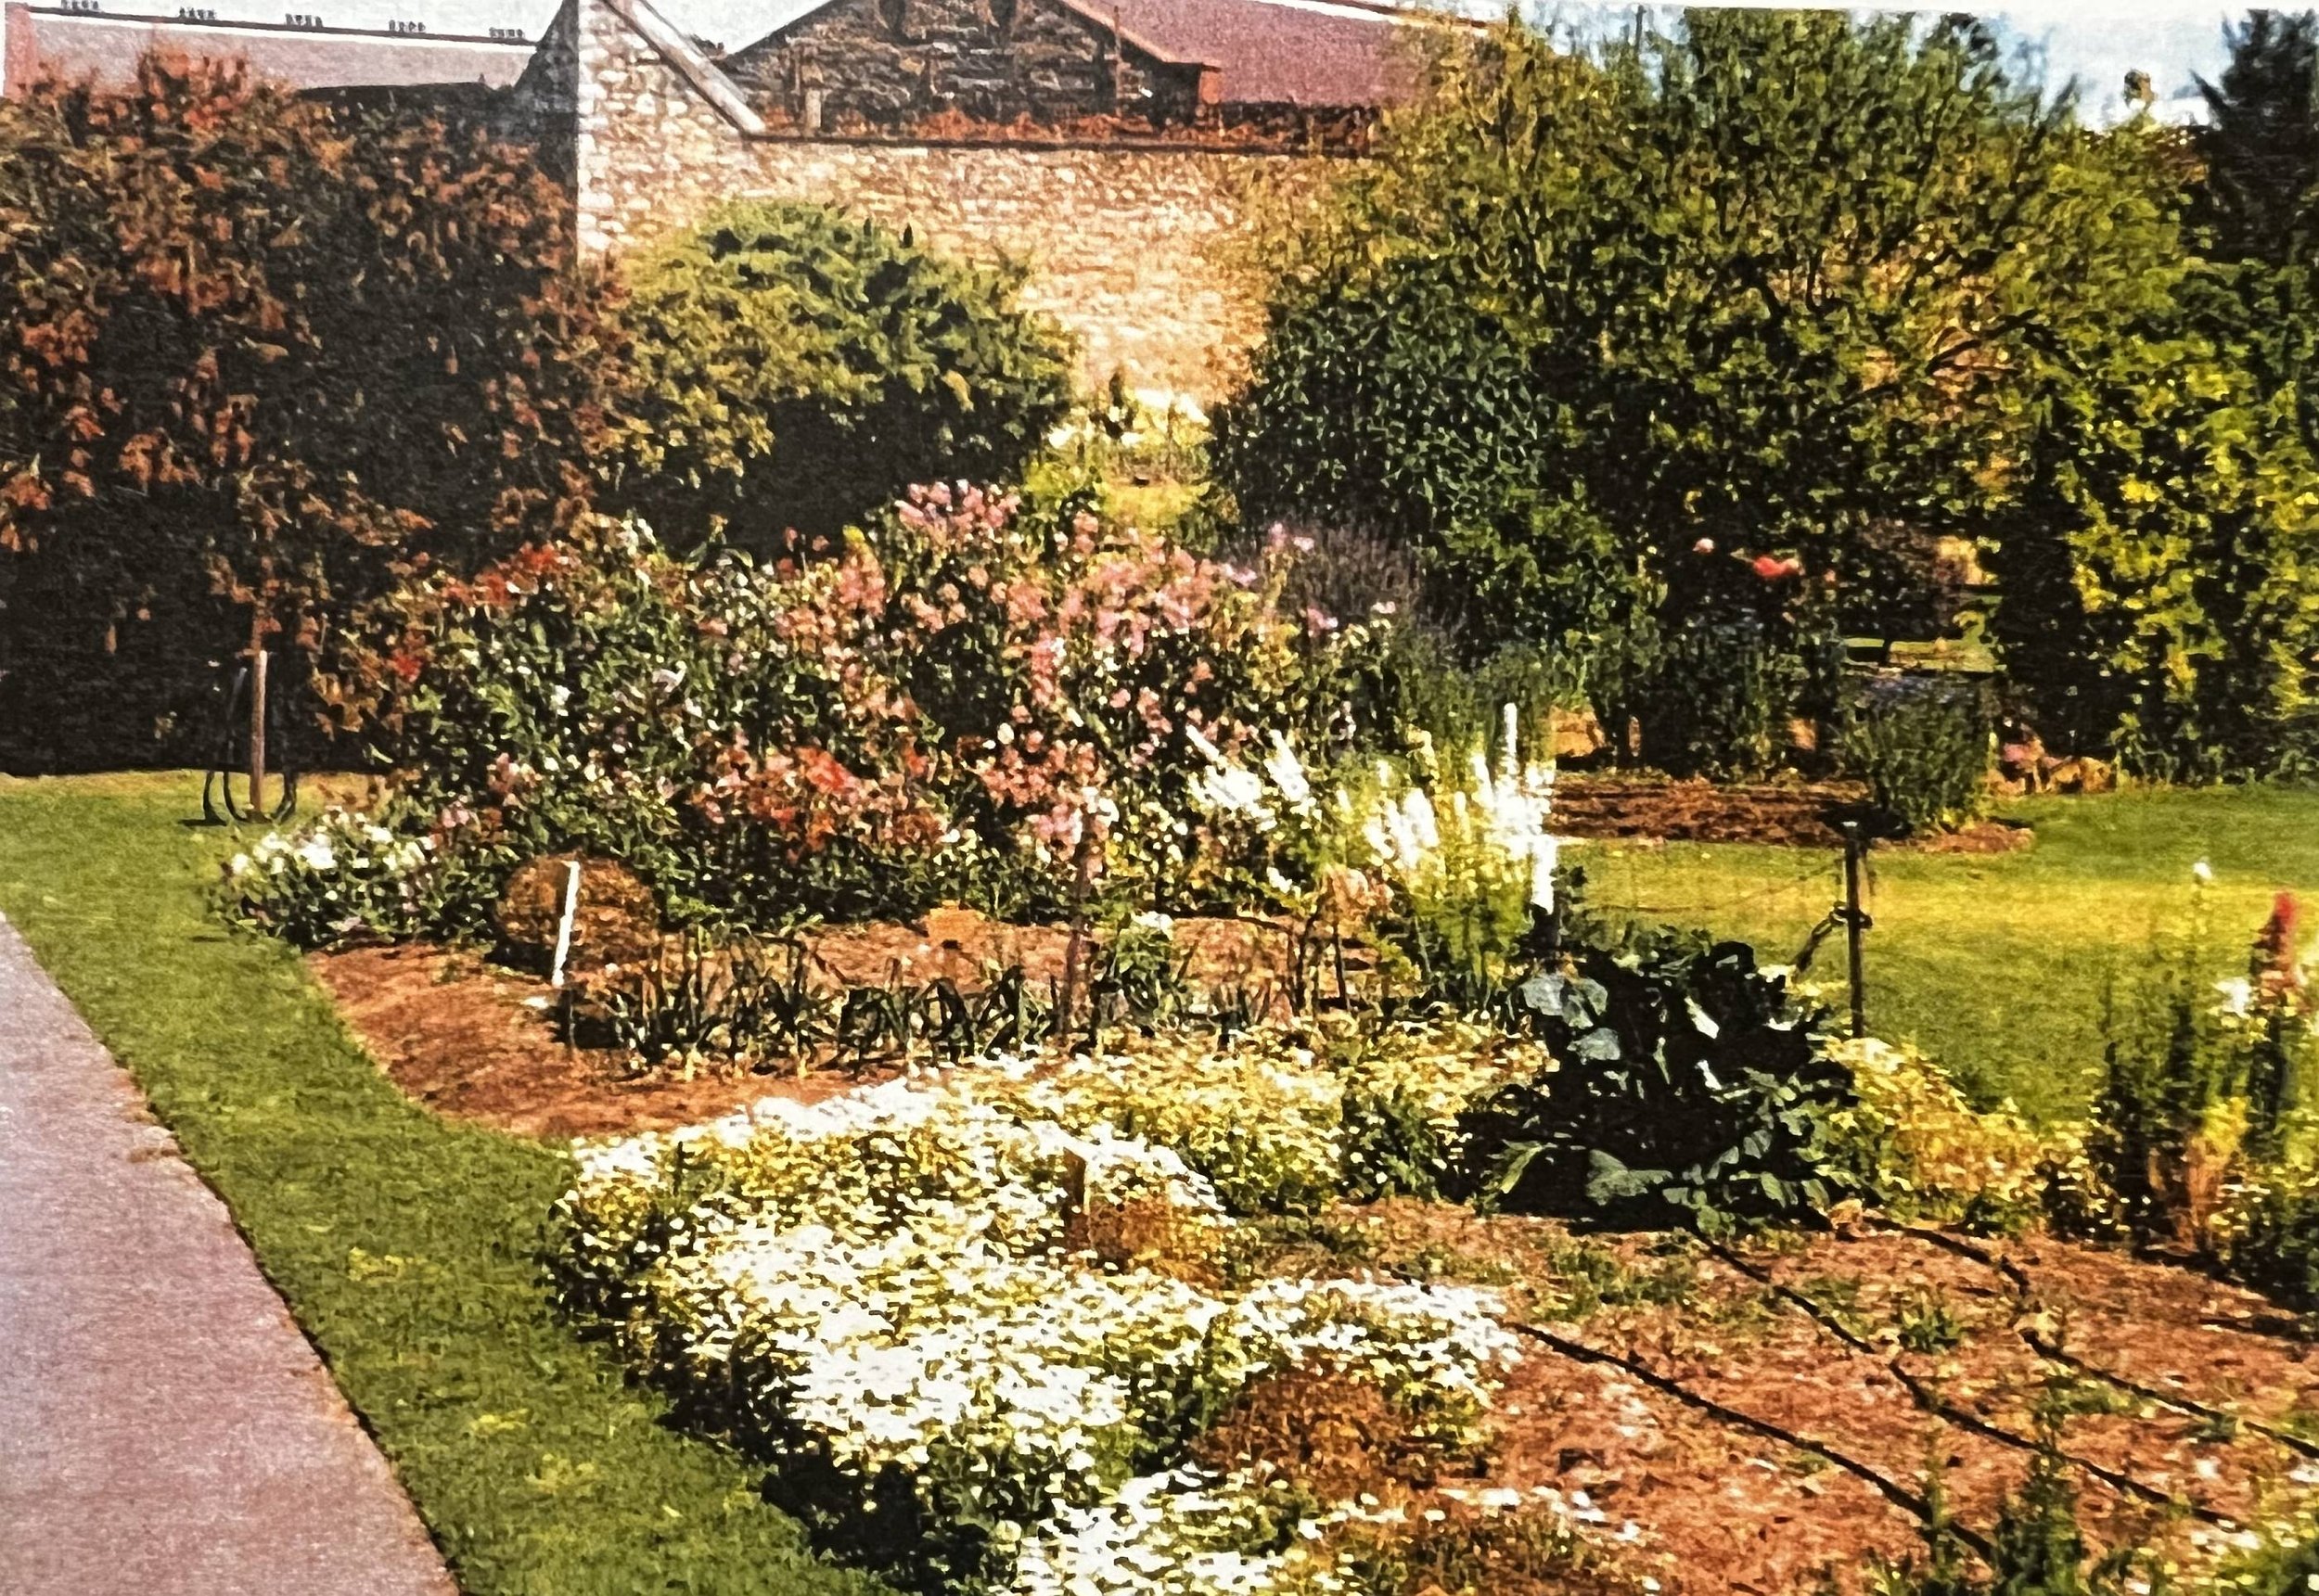 Photos from a 20th anniversary brochure (c 2012) for the Roma Mitchell Garden